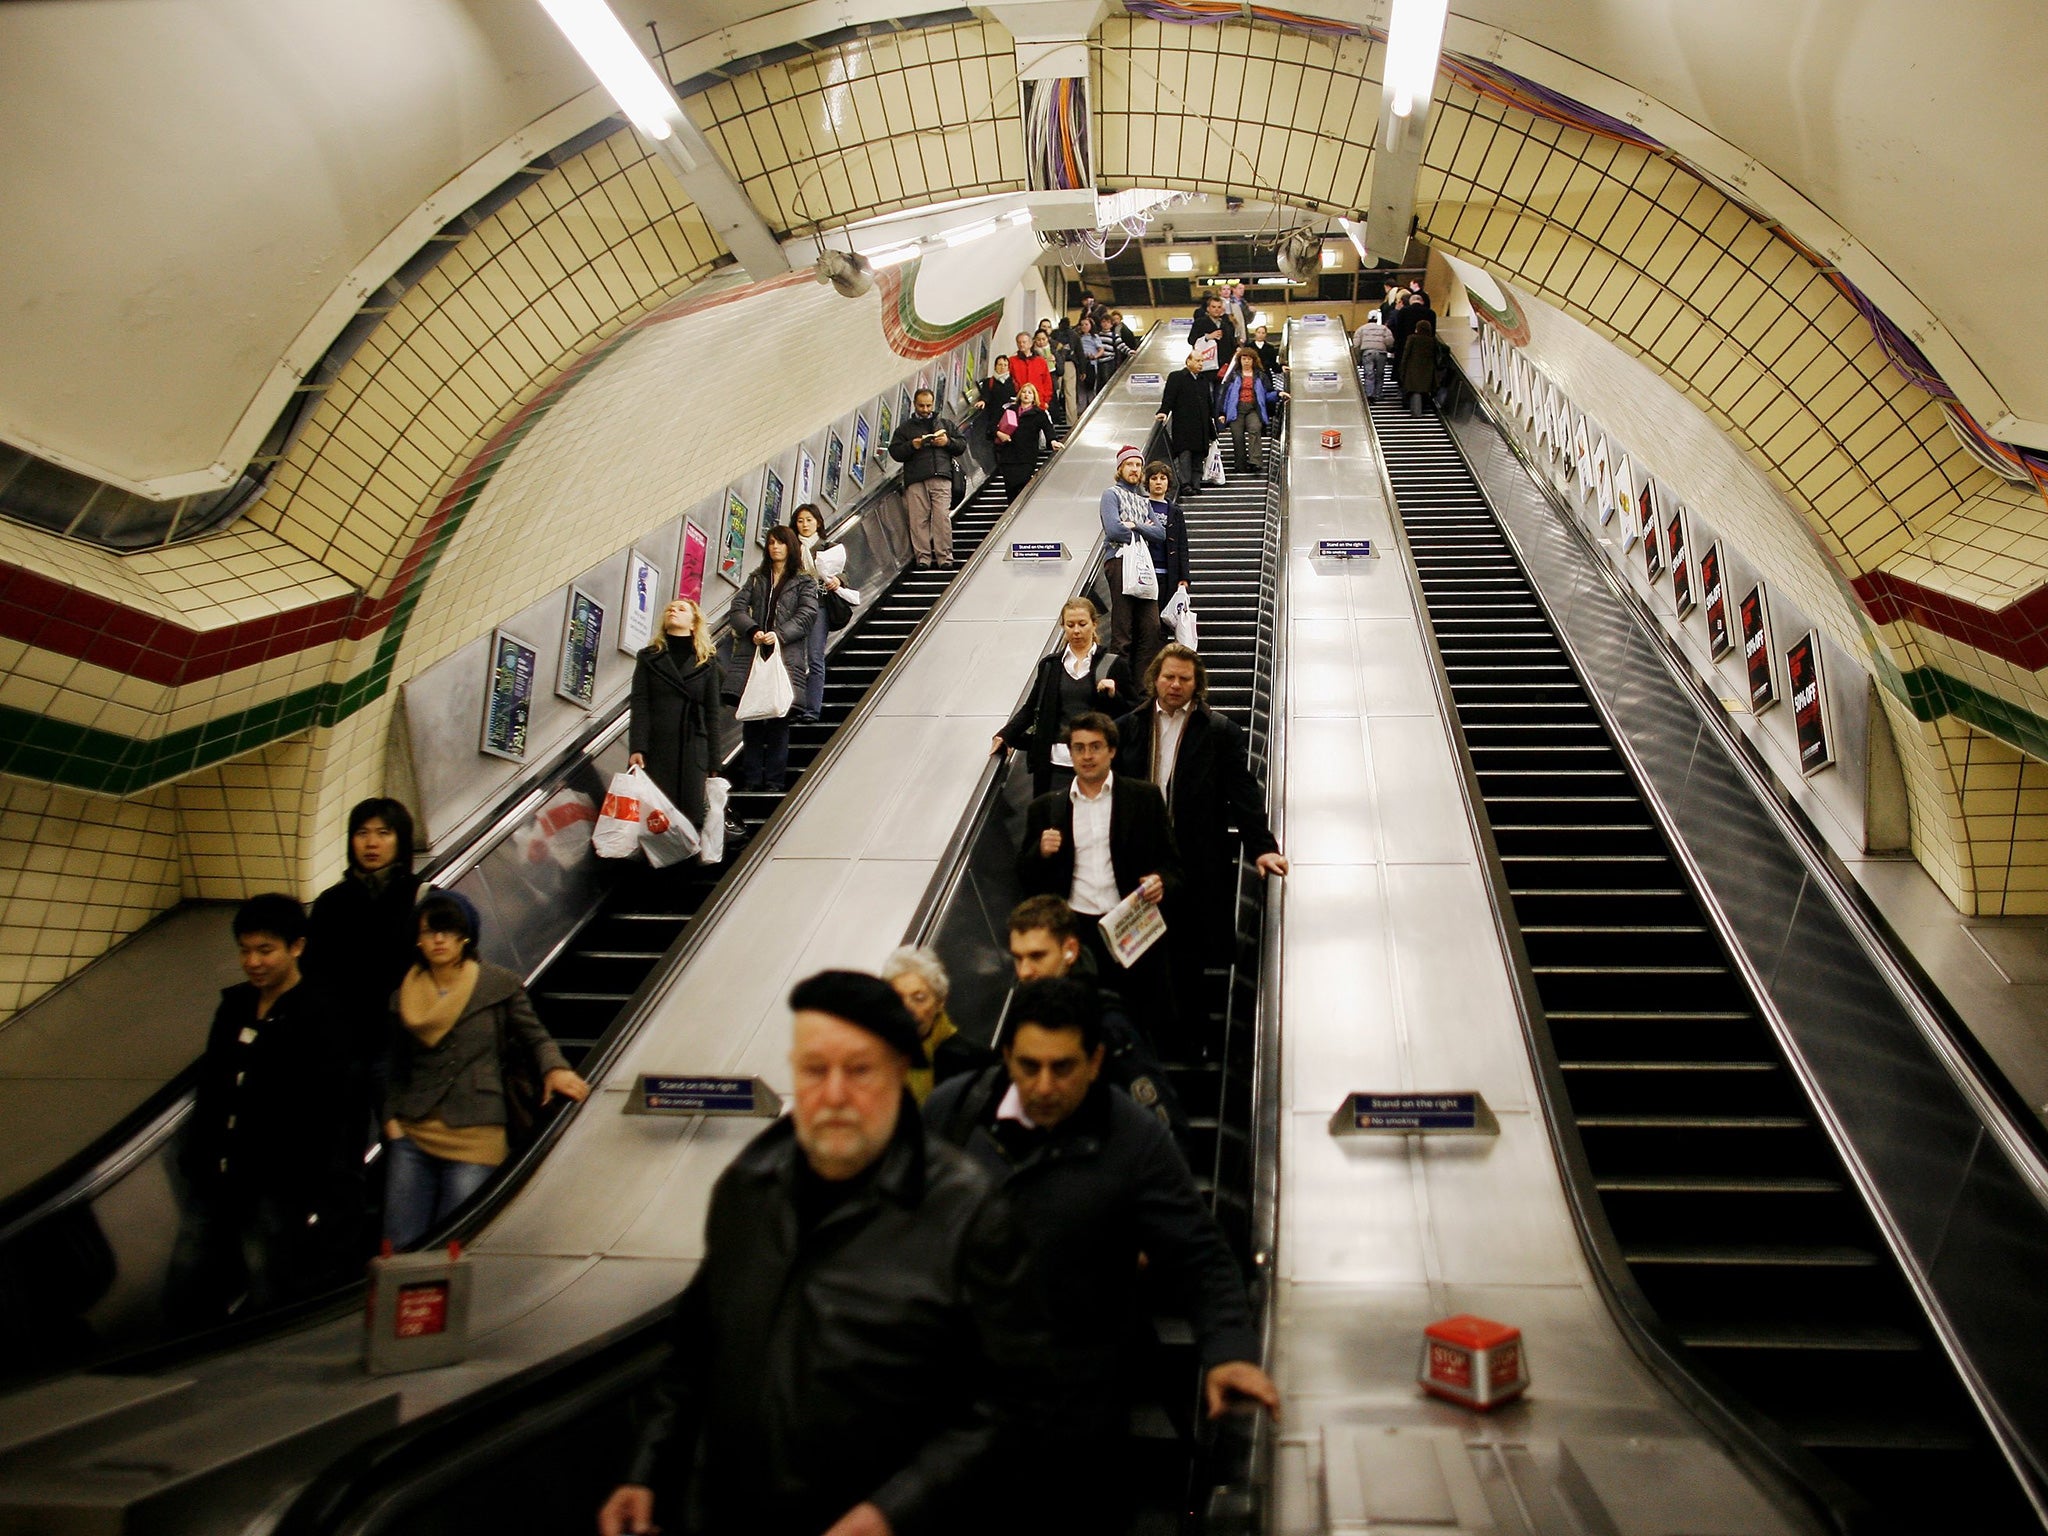 Traditional tube etiquette is that standers keep to right to allow walkers to power up the left